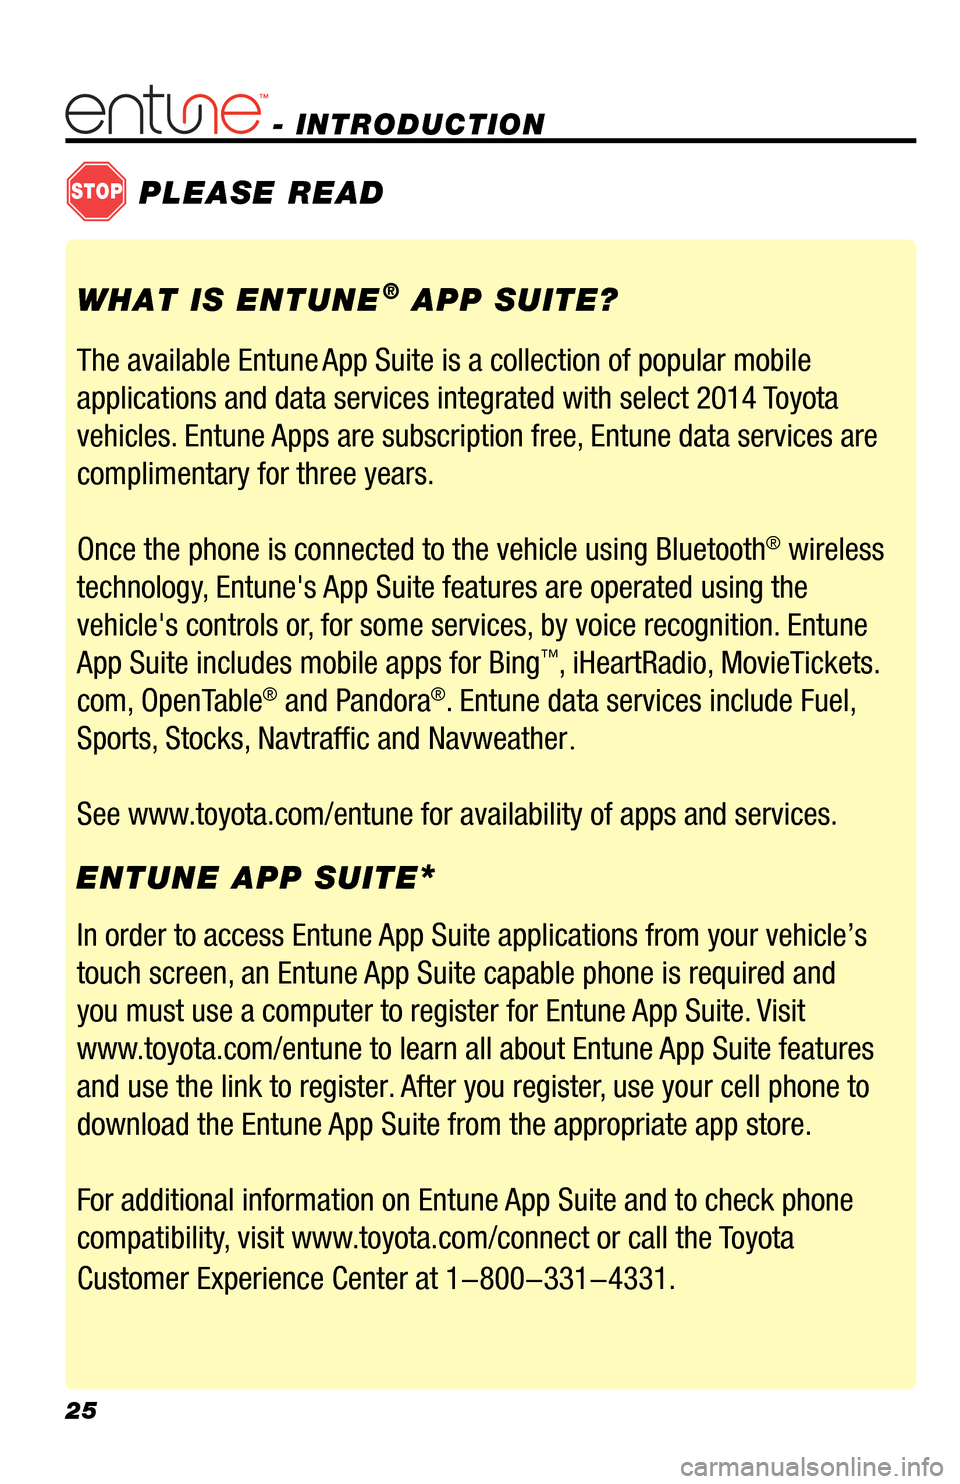 TOYOTA RAV4 EV 2014 1.G Navigation Manual 25
- INTRODUCTION 
STOPPLEASE READ
WHAT IS ENTUNE® APP SUITE?
The available Entune
 App Suite is a collection of popular mobile 
applications and data services integrated with select 2014 Toyota 
veh